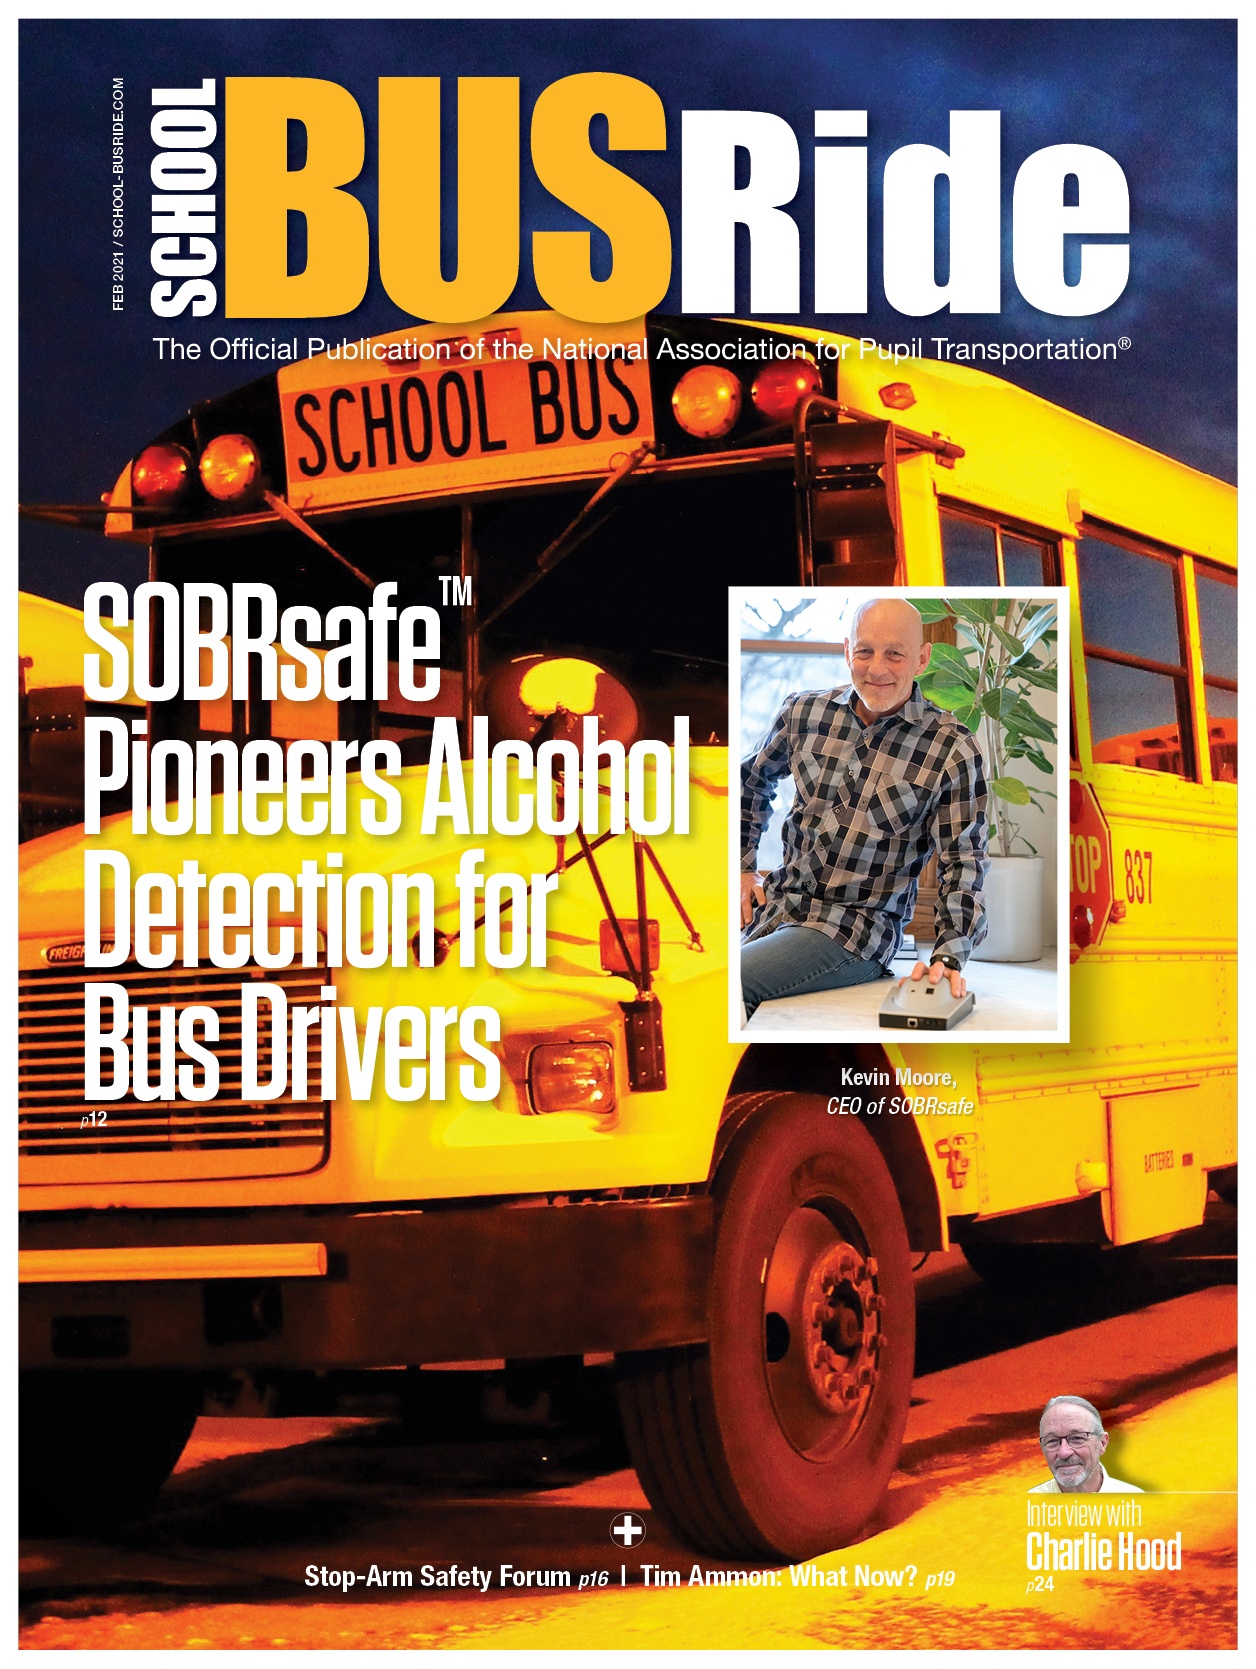 SOBRsafe Pioneers Alcohol Detection for Bus Drivers